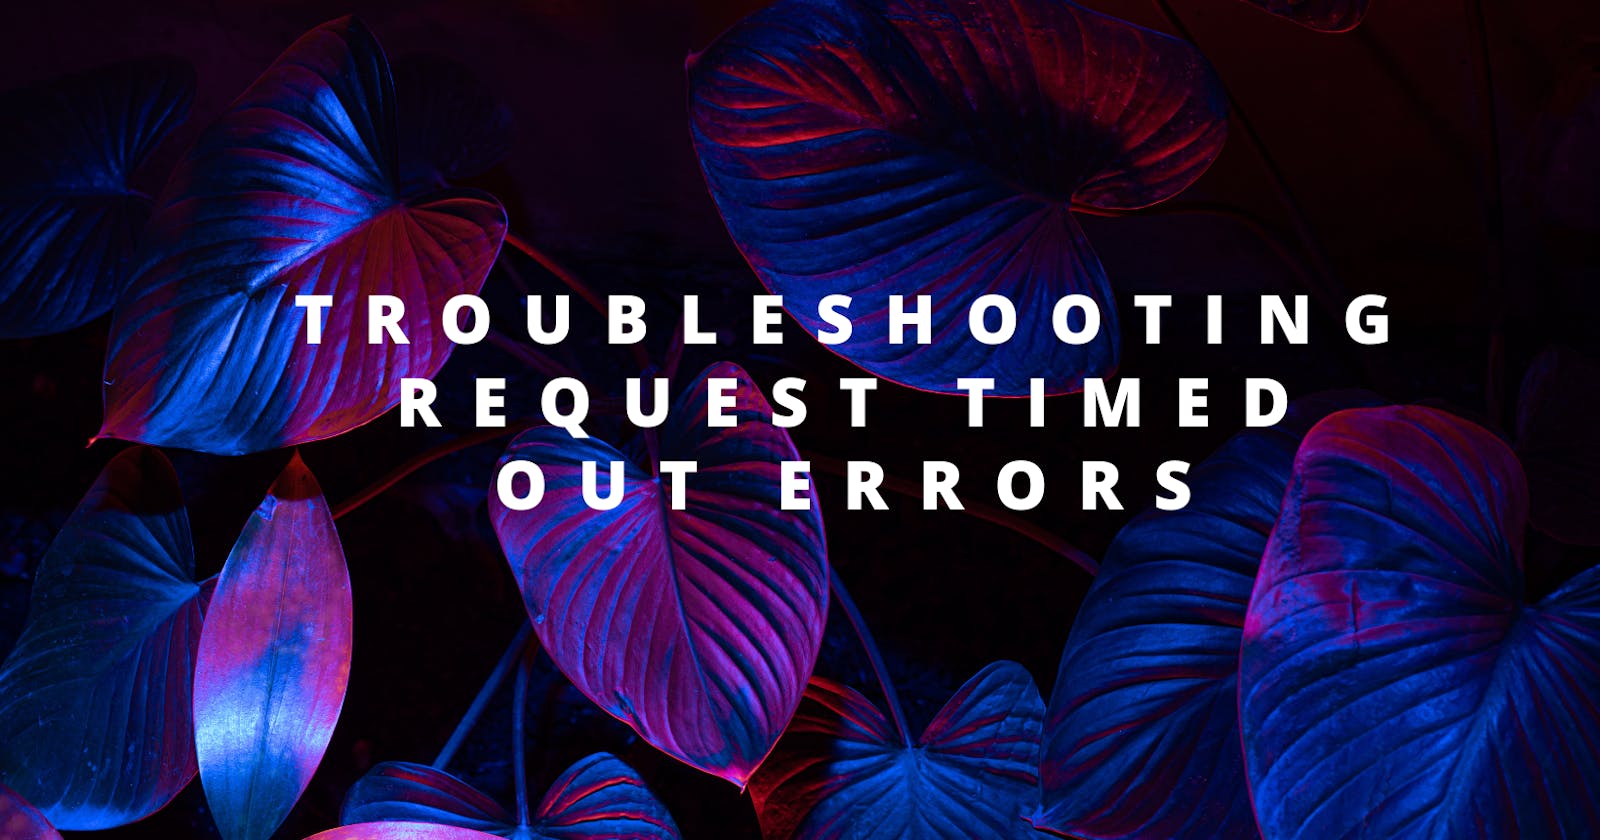 Troubleshooting Request Timeout Errors in FastAPI Applications Deployed on Elastic Beanstalk